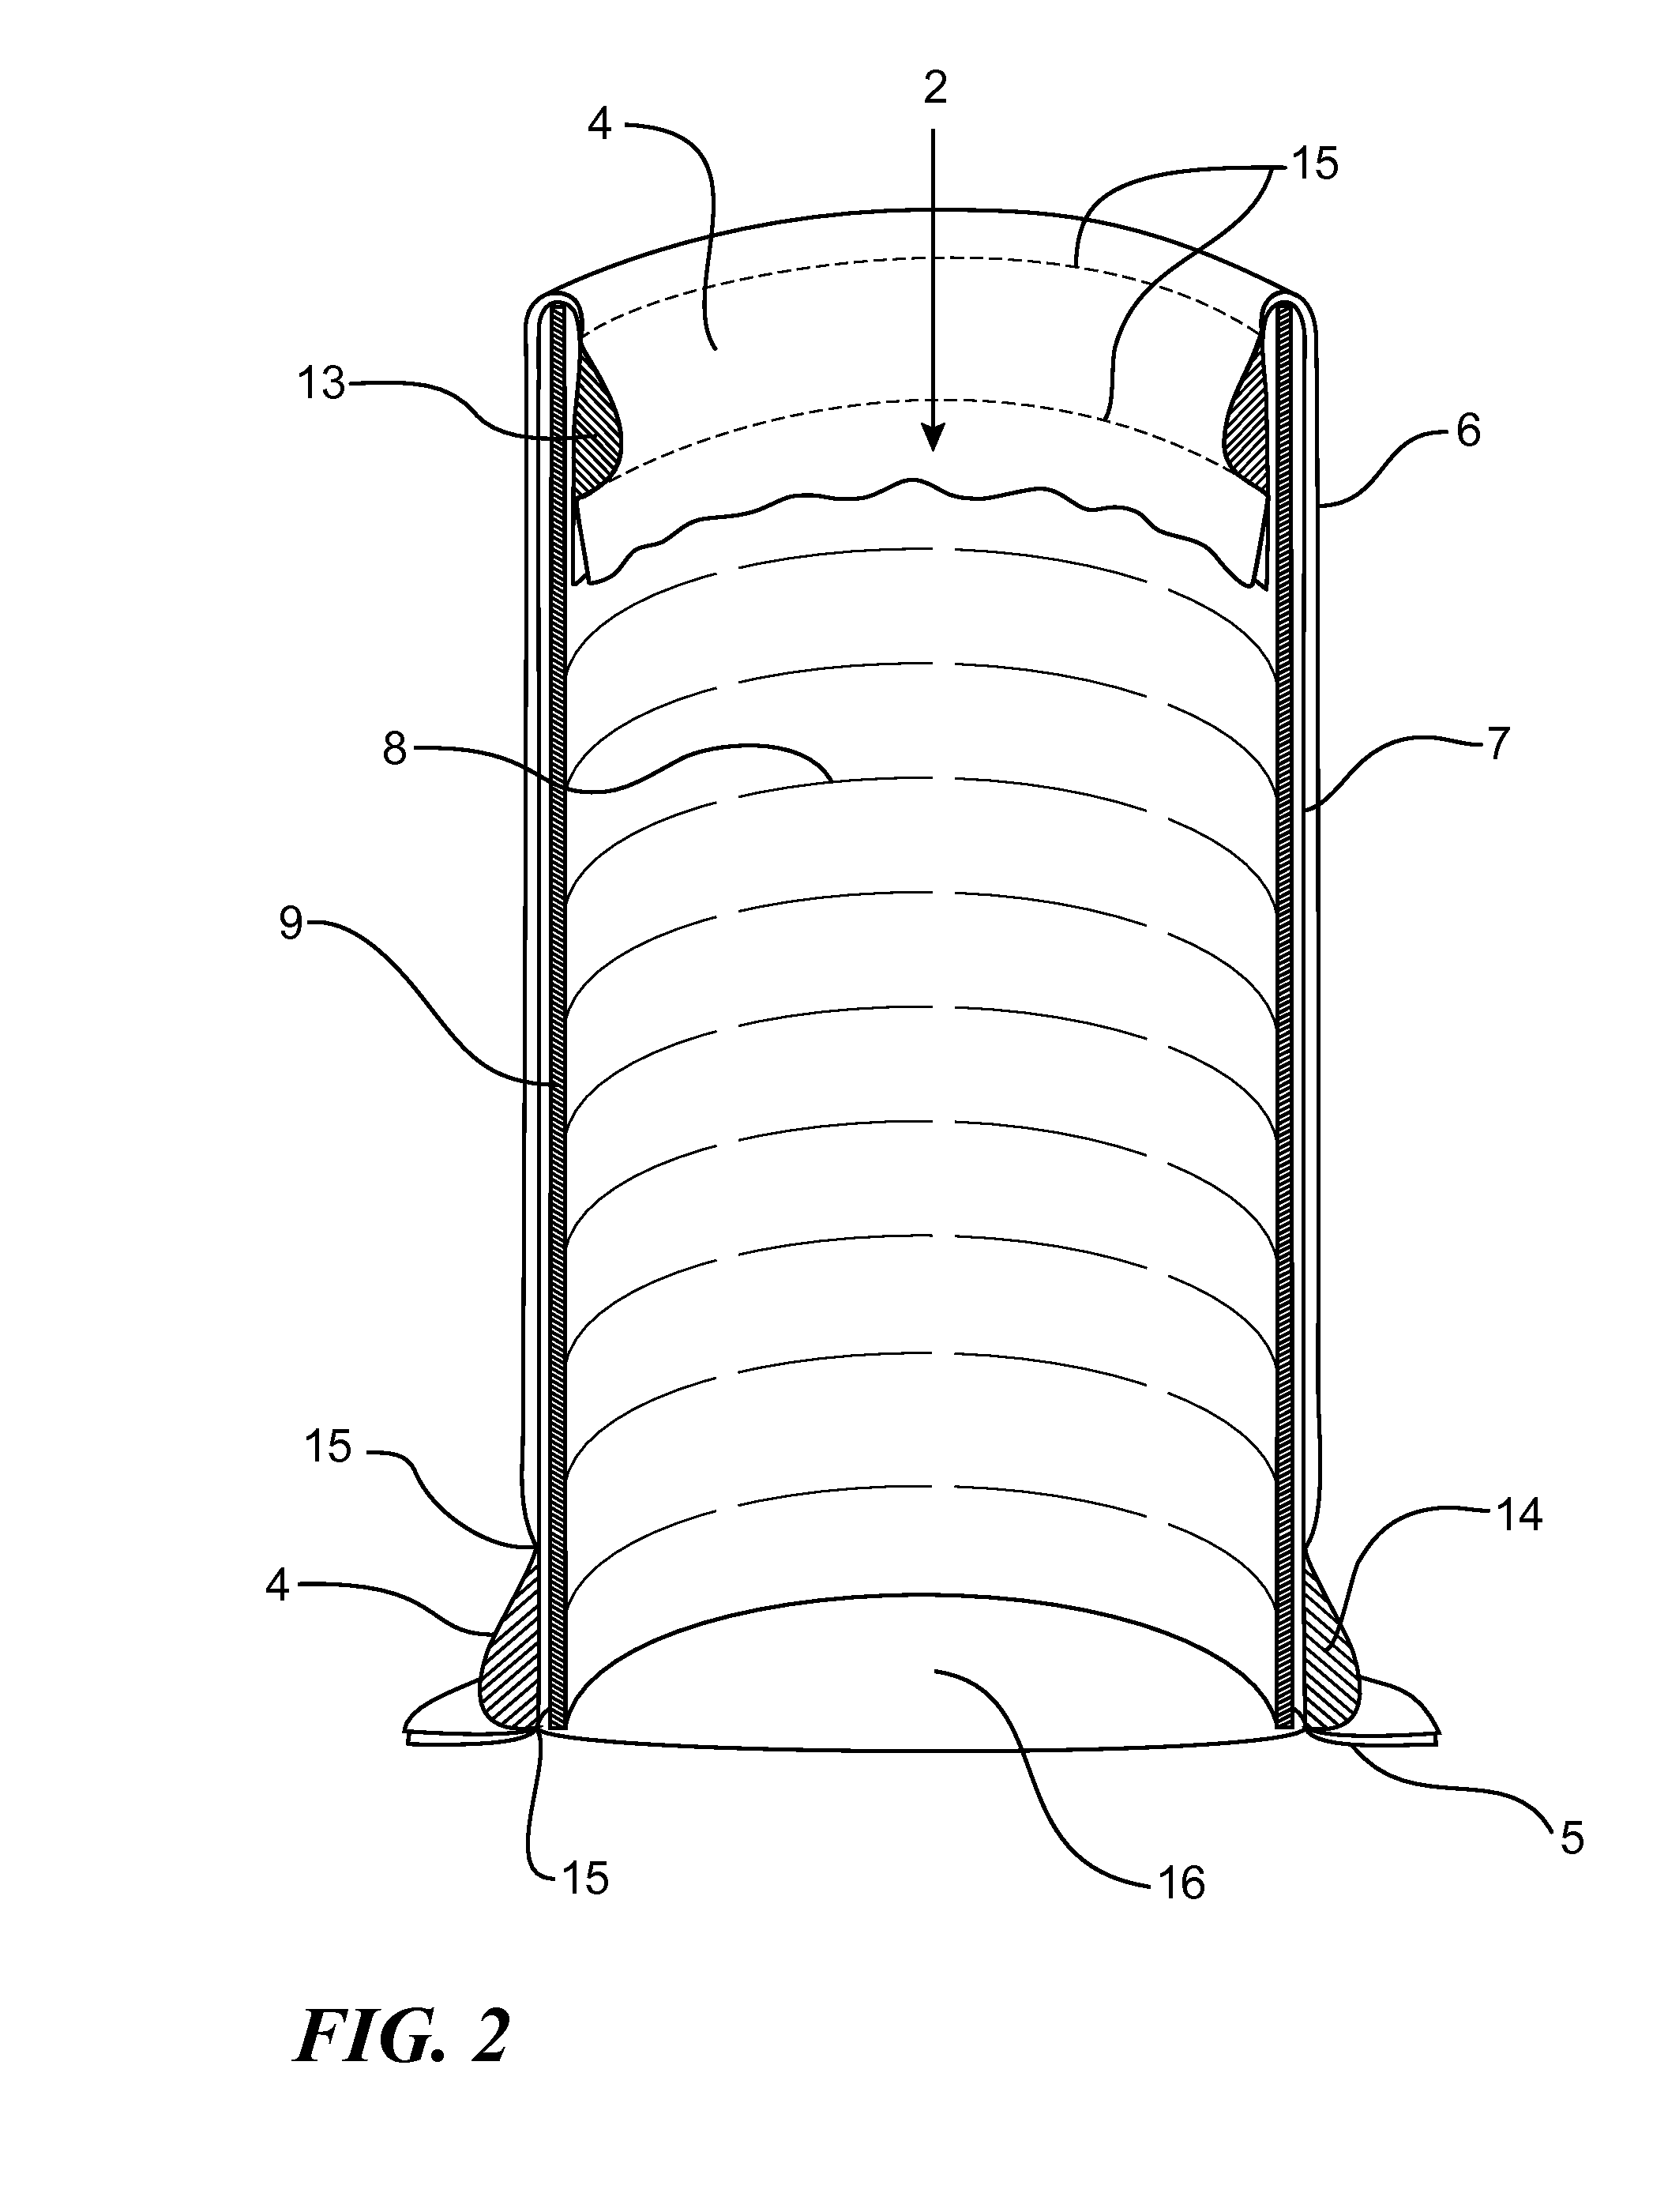 Filter Sleeve for Enabling Waste Water Discharge Directly into the Environment